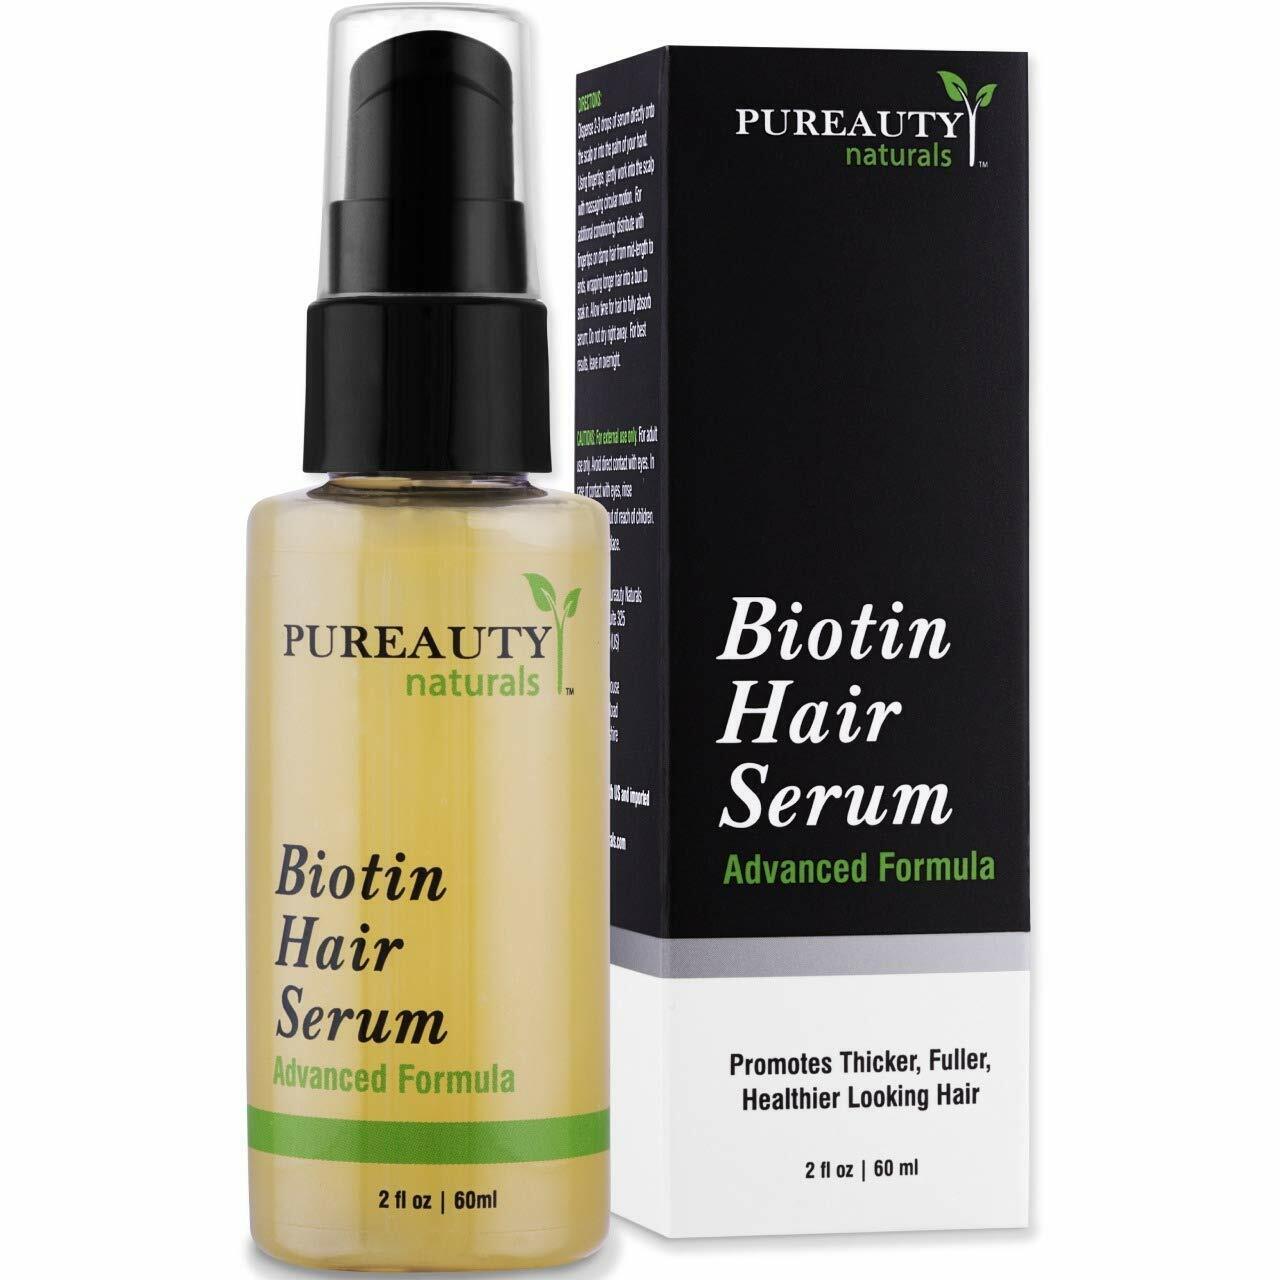 Biotin Hair Growth Serum To Help Grow Healthy, Strong Hair for Men and Women Pureauty Naturals